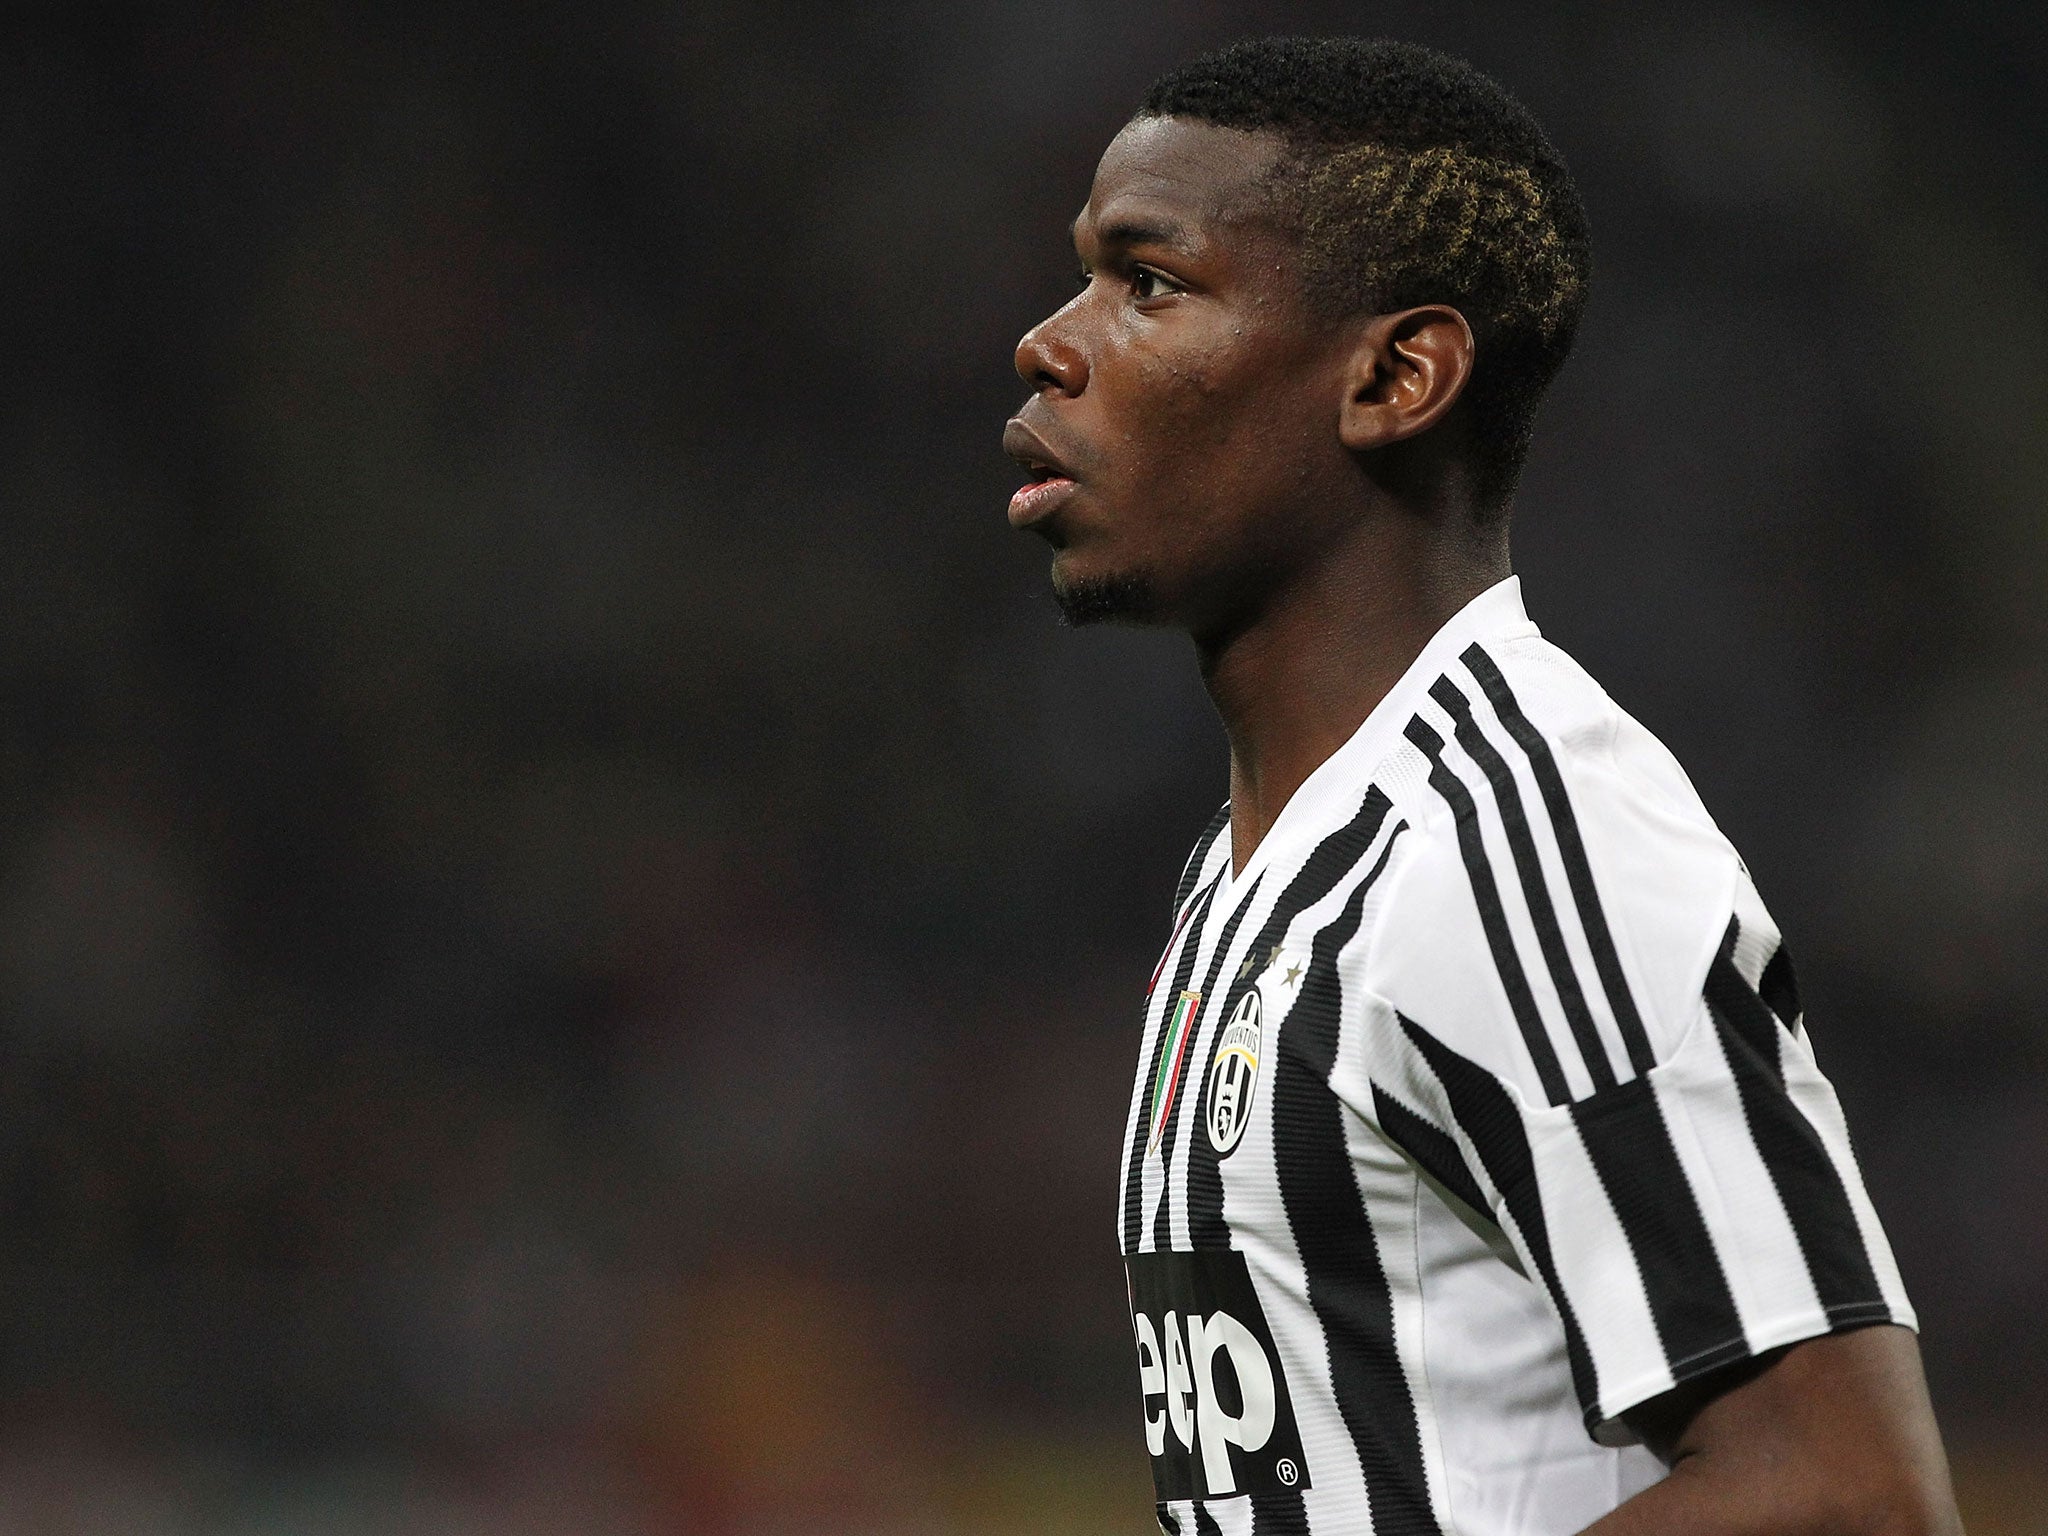 Pogba is expected to complete his United move imminently